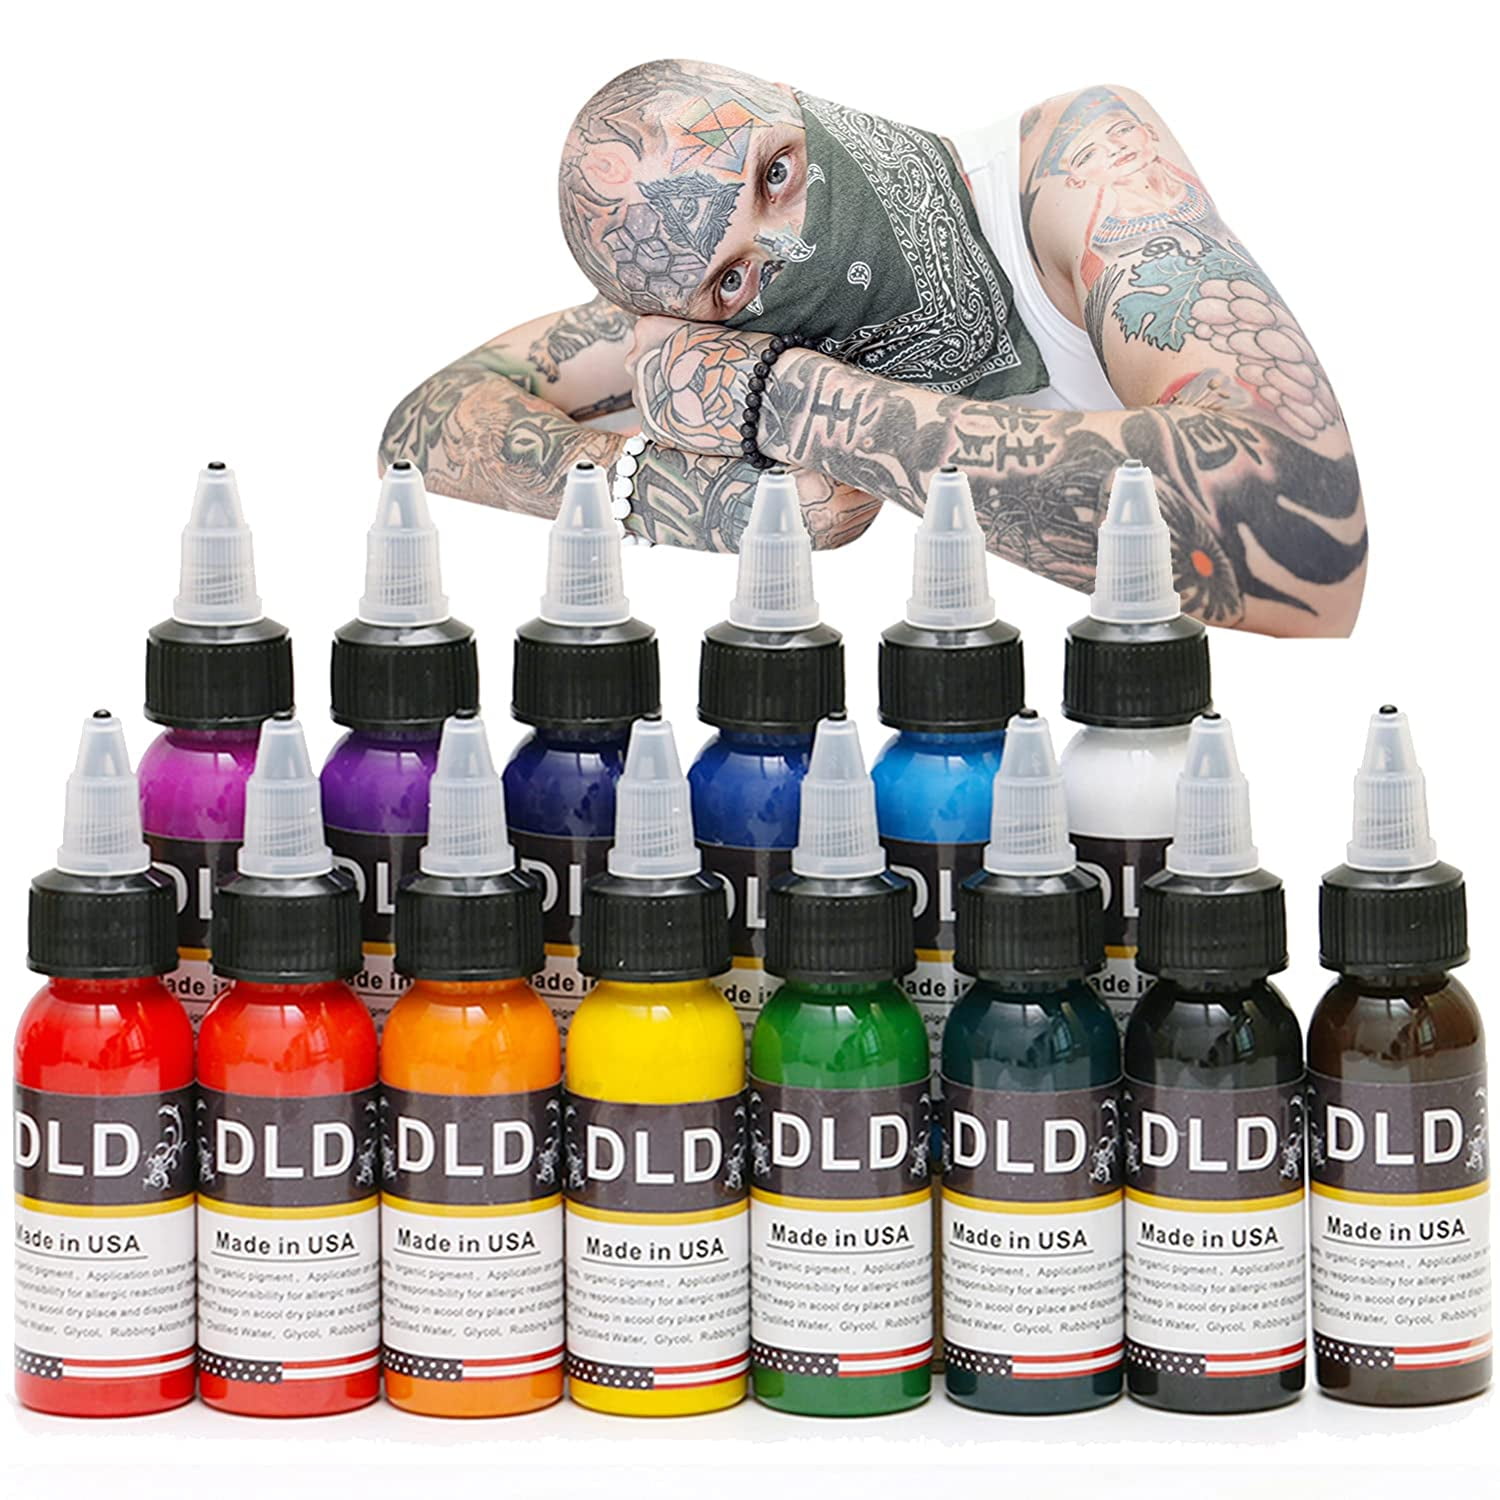 1 Bottle Temporary Tattoo Ink Pigment Body Arts 30ml Black Onetime Makesup  Paints Natural Painless Tattoo Waterproof With Brush  Temporary Tattoos   AliExpress